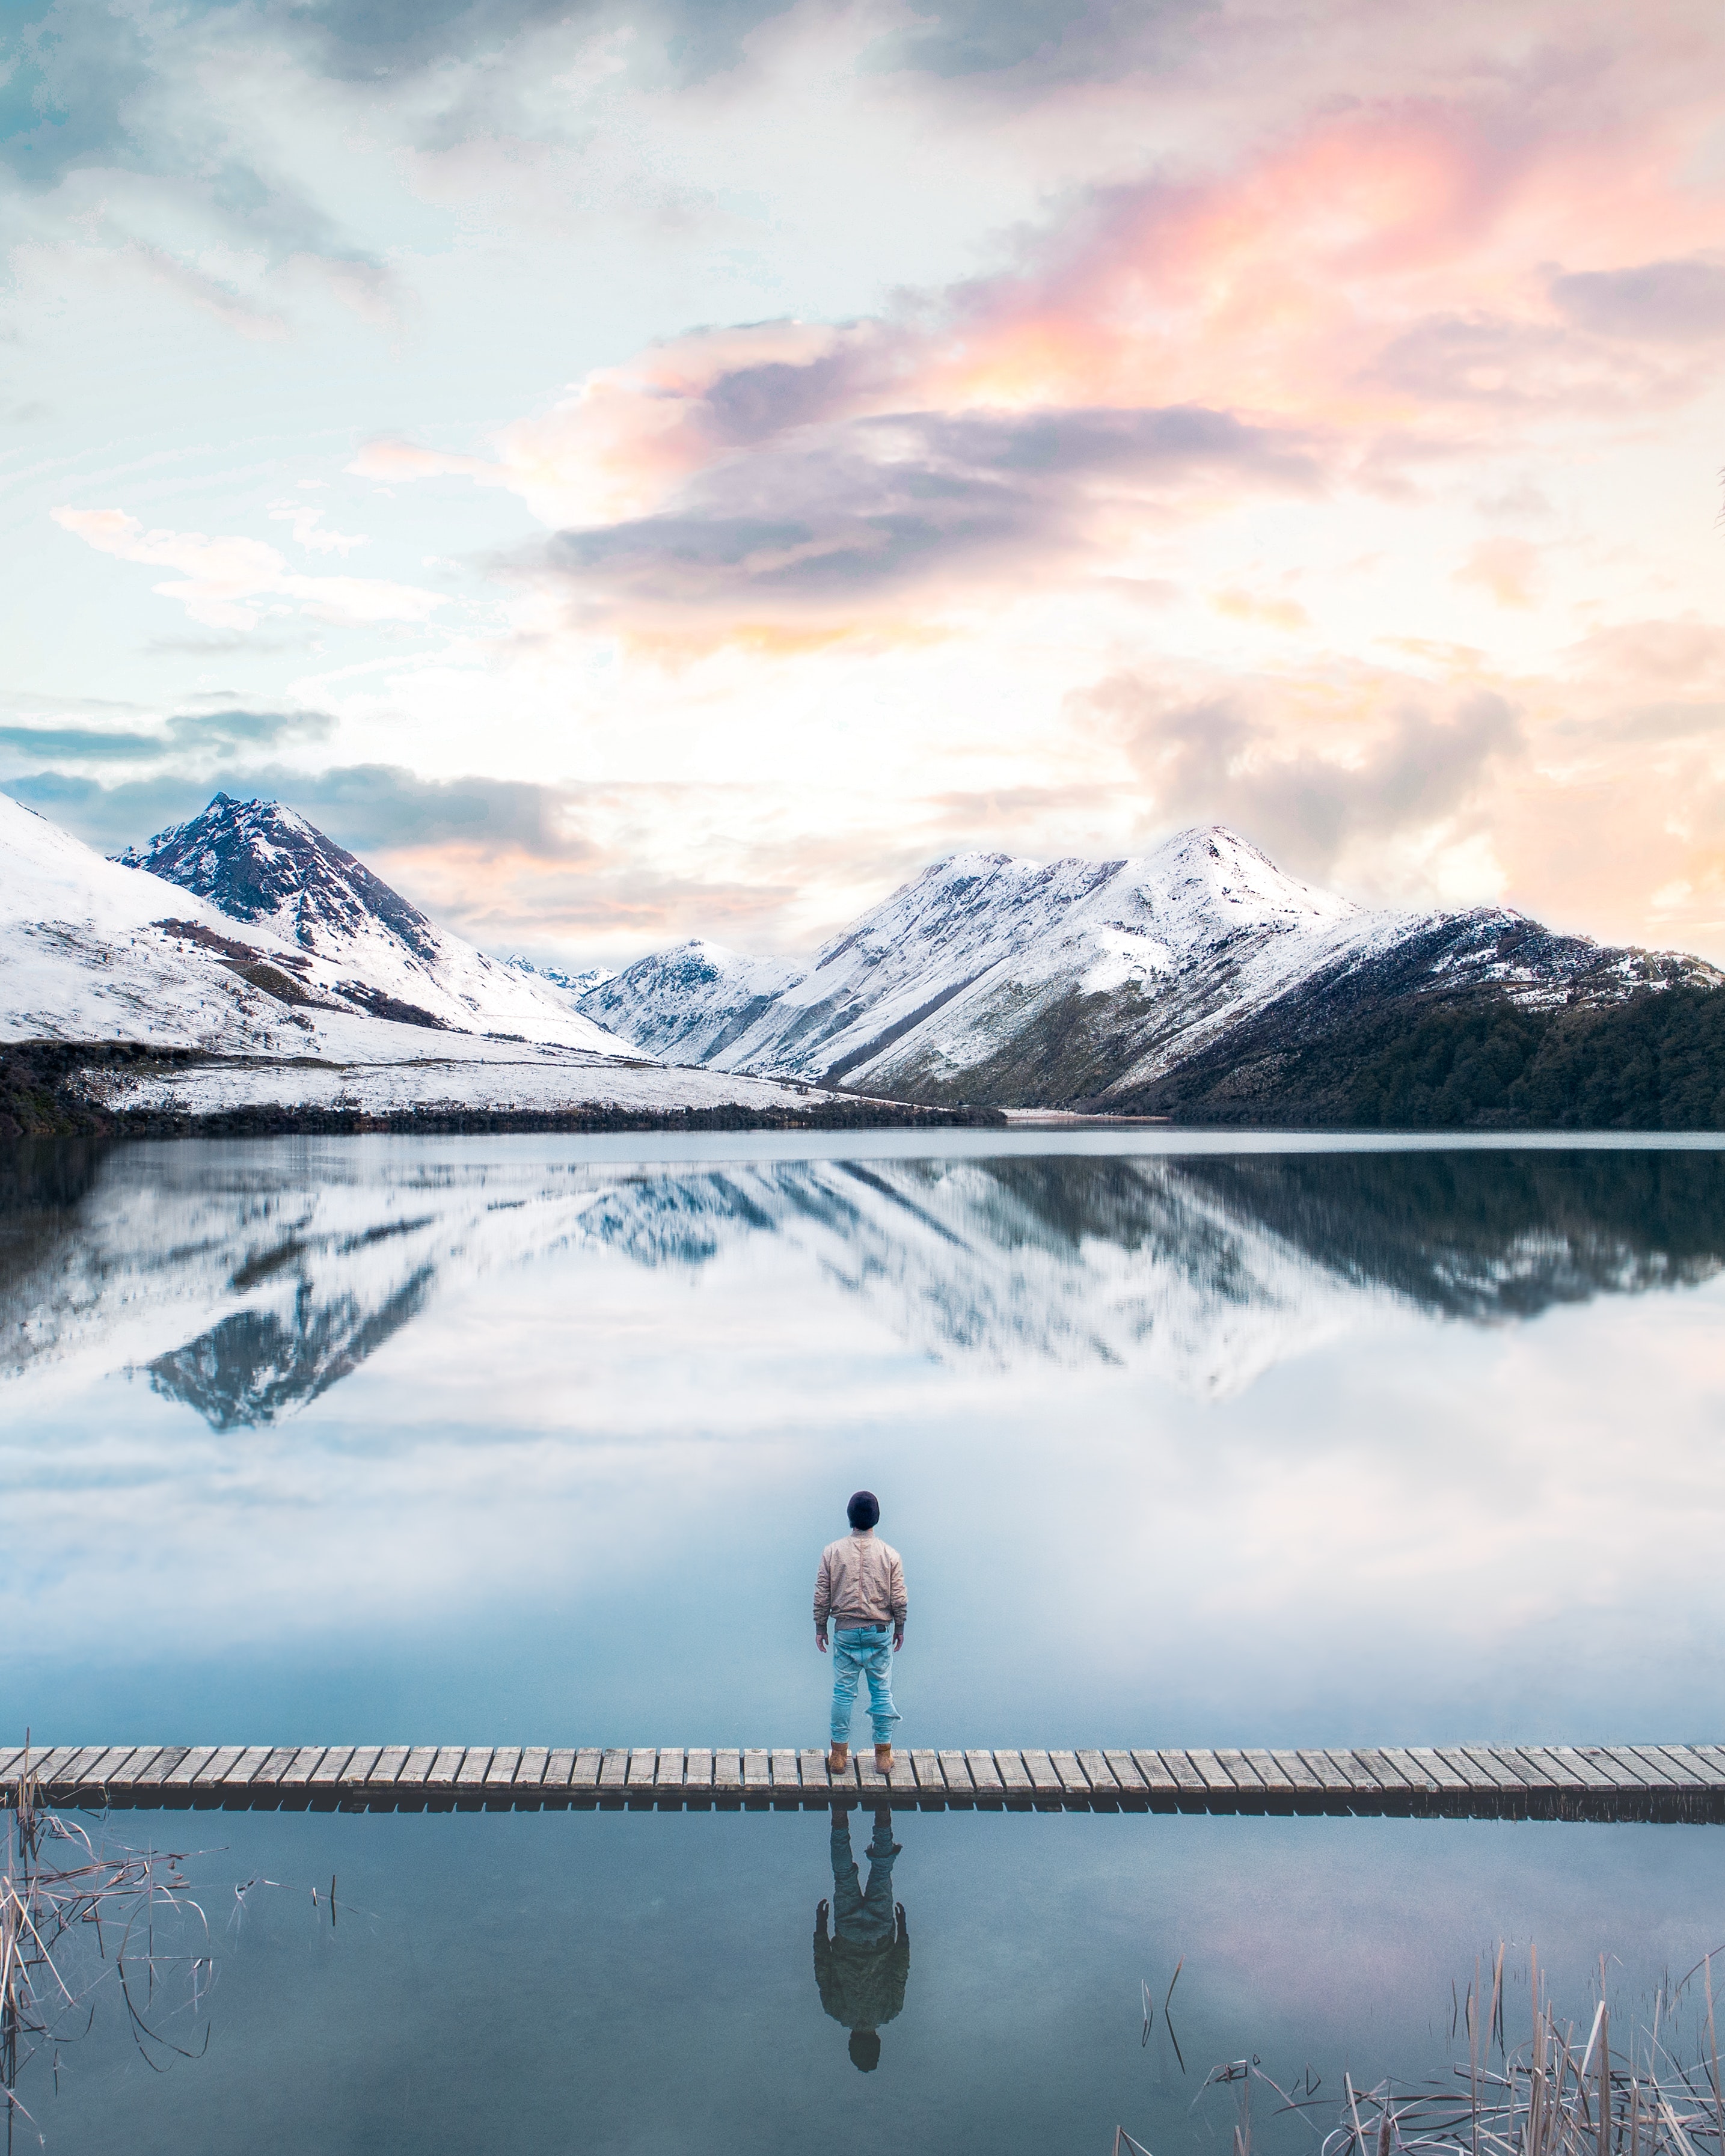 An individual looking at snowy mountains.│Source: Unsplash